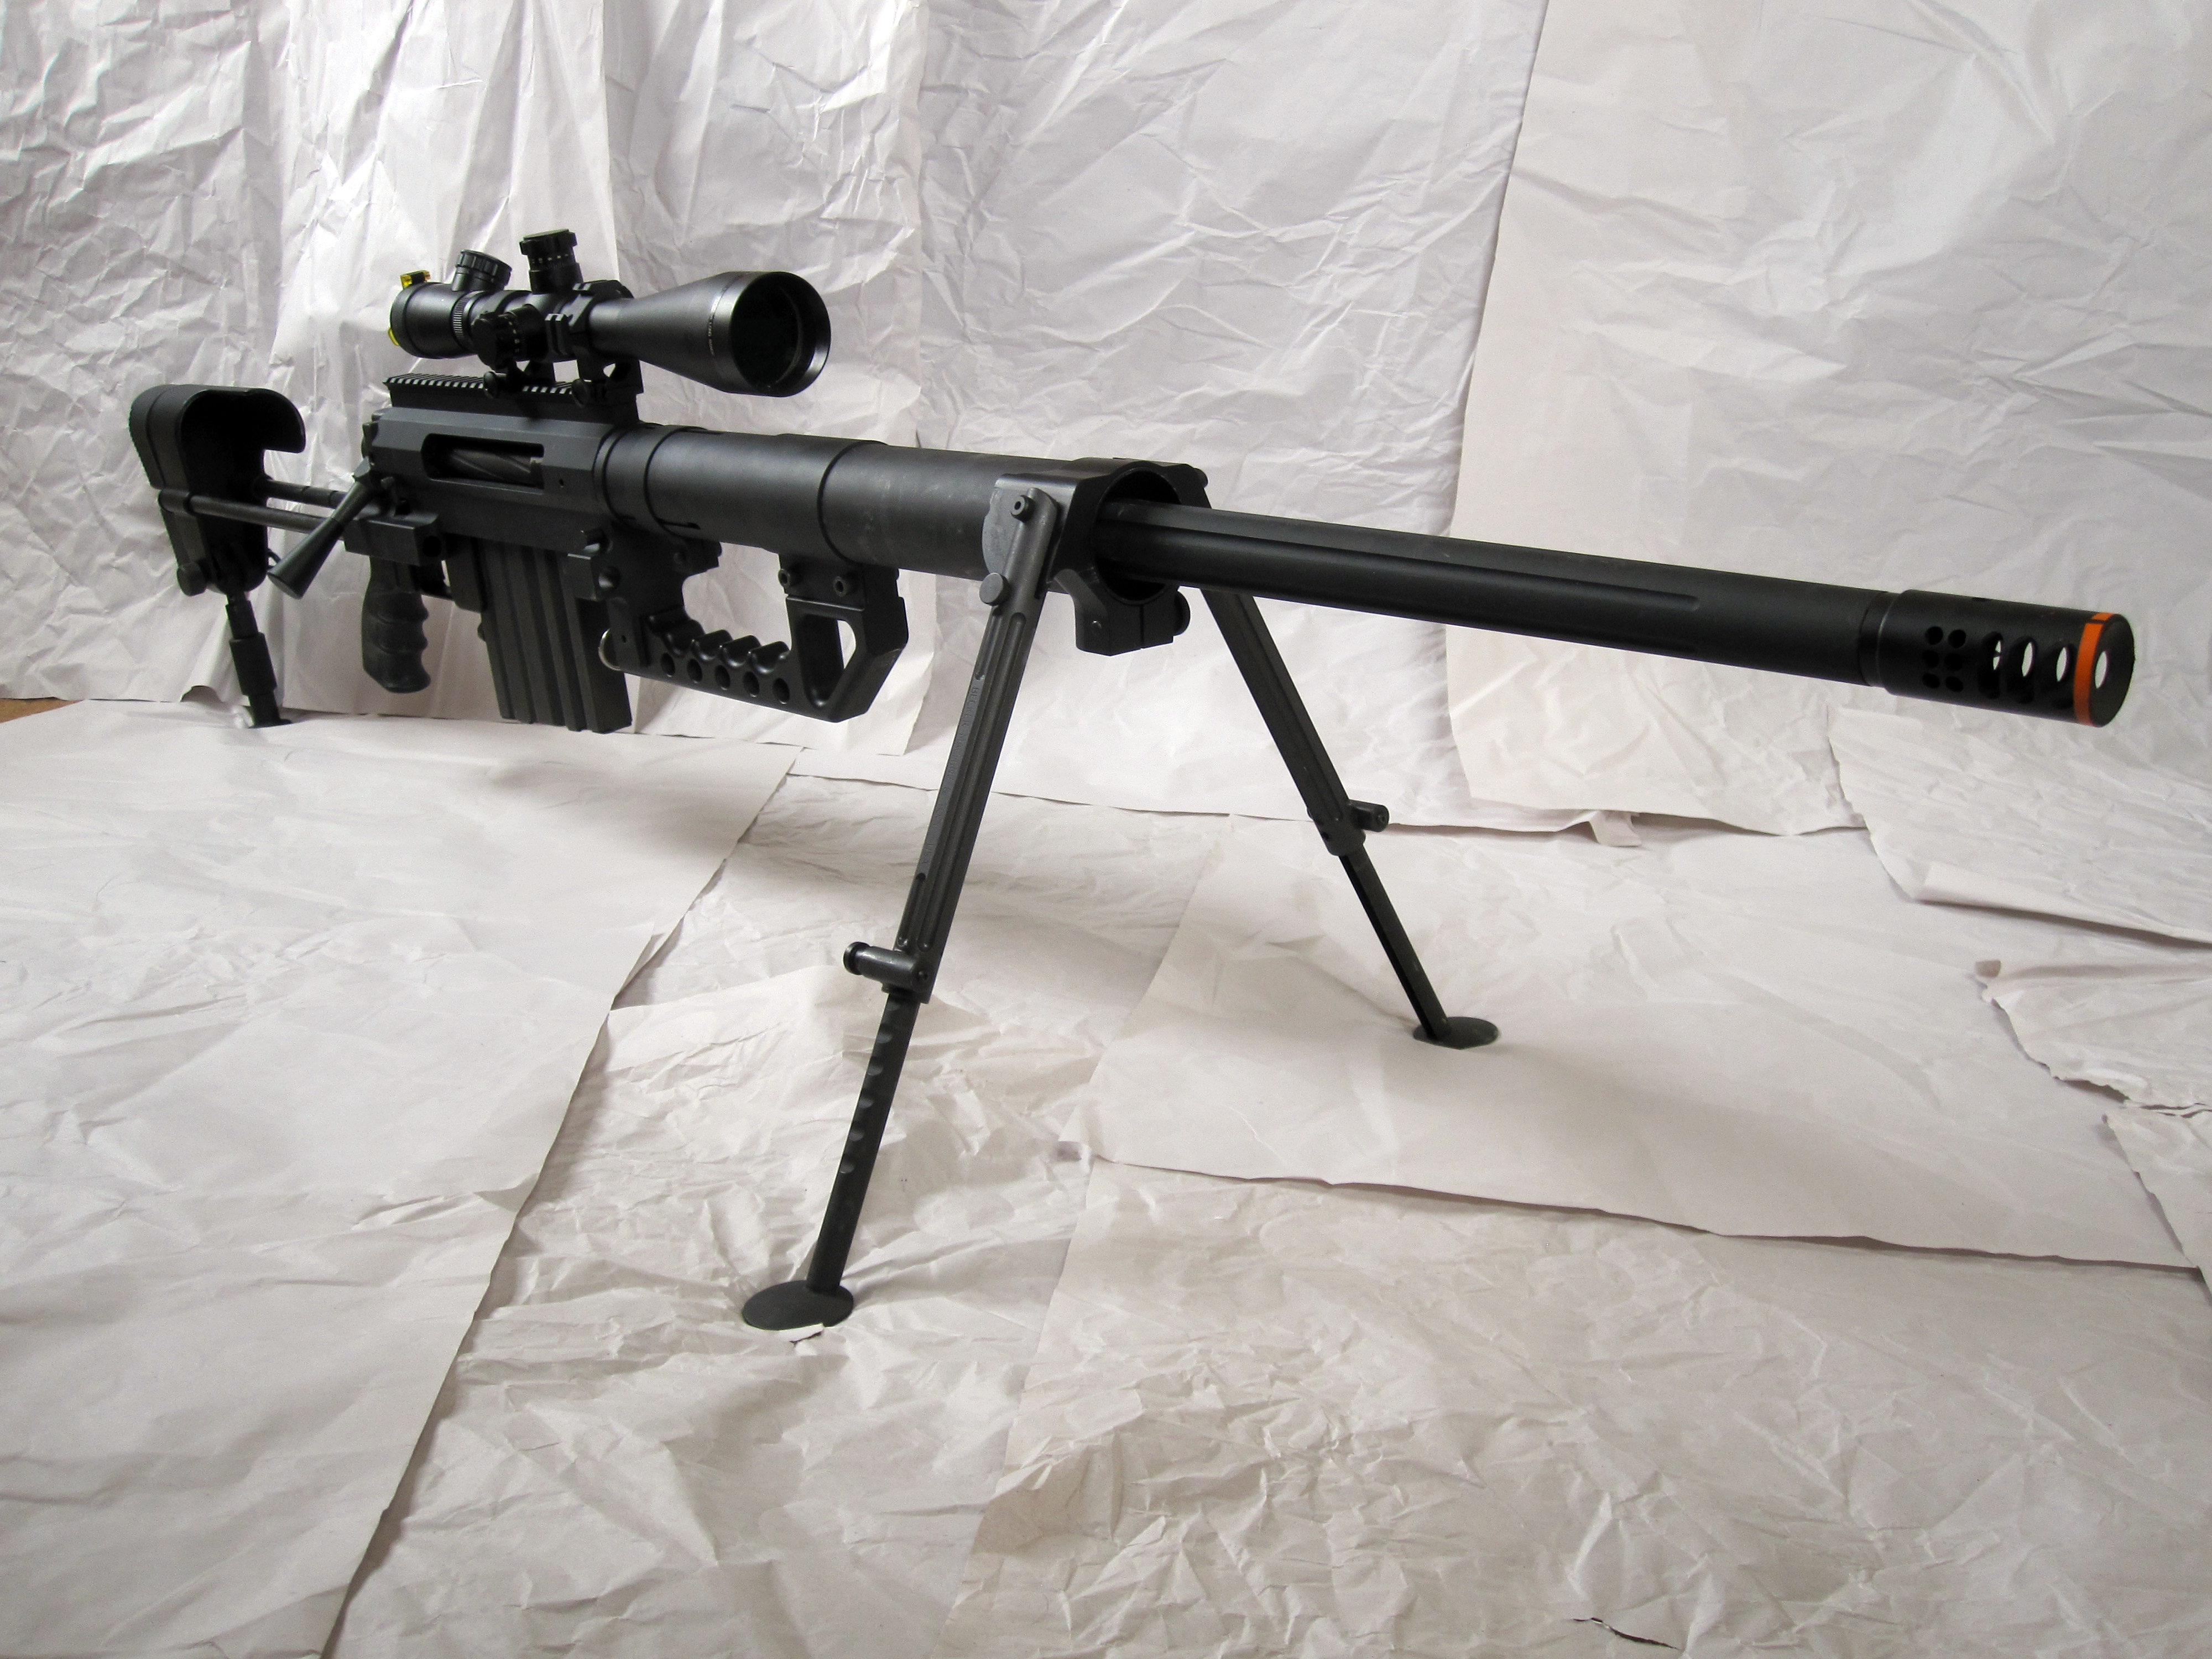 SOCOM Gear 408 Cheytac Intervention M200 Gas Airsoft Gun with CO2 Bolt Ares...